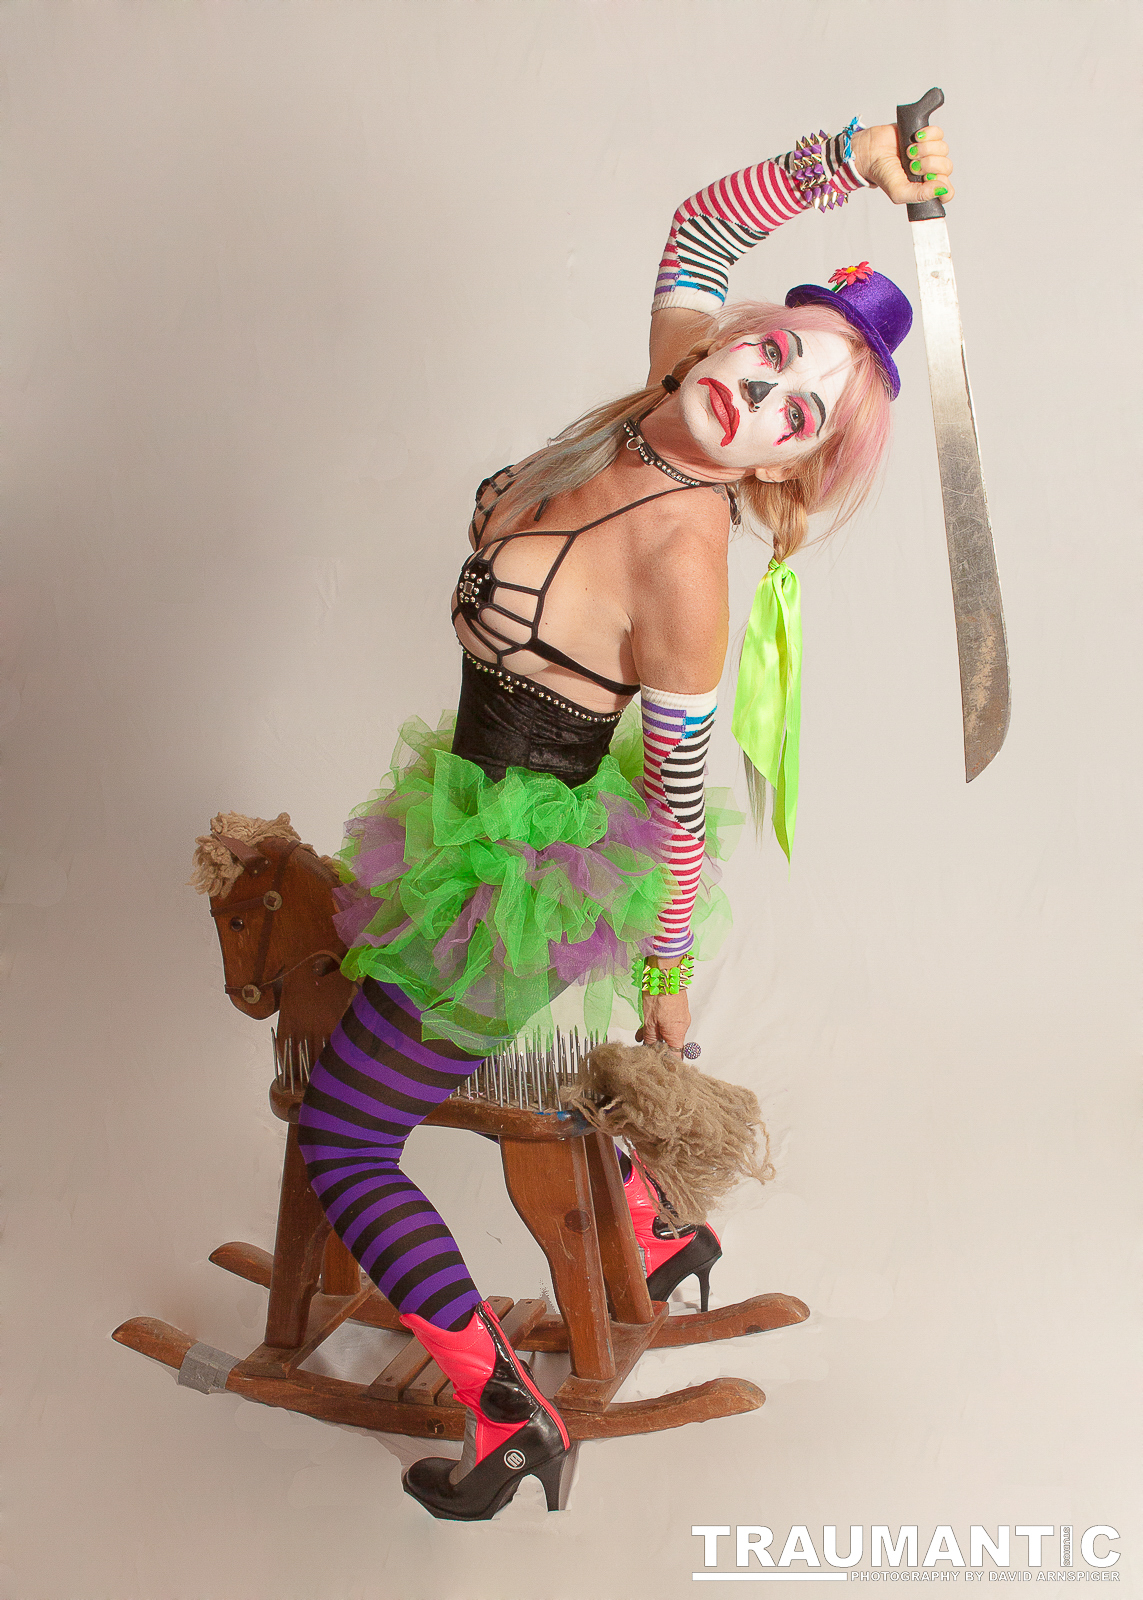 I have known Sinn for a few years now having shot several Freakshow Wrestling events.  He asked me to work with a second photographer to do a promo shoot for an upcoming event.  We set up in my home studio and I ended up getting a lot of great shots working around the second photographer.  It was a fun shoot.